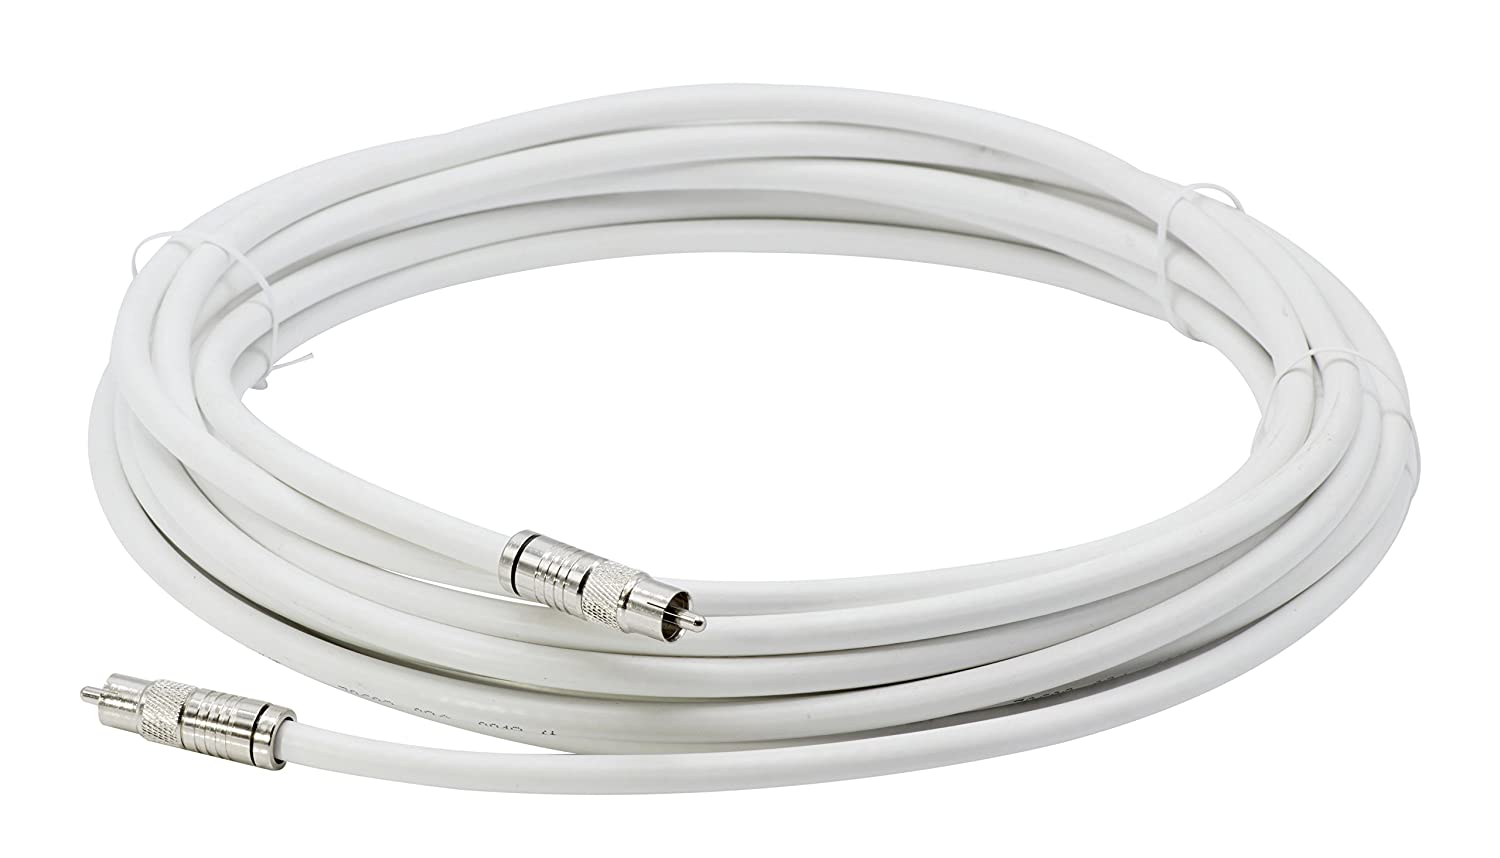 THE CIMPLE CO - White Digital Audio Coaxial Cable Subwoofer Cable - (S/PDIF) RCA Cable, 75 Feet - image 1 of 6